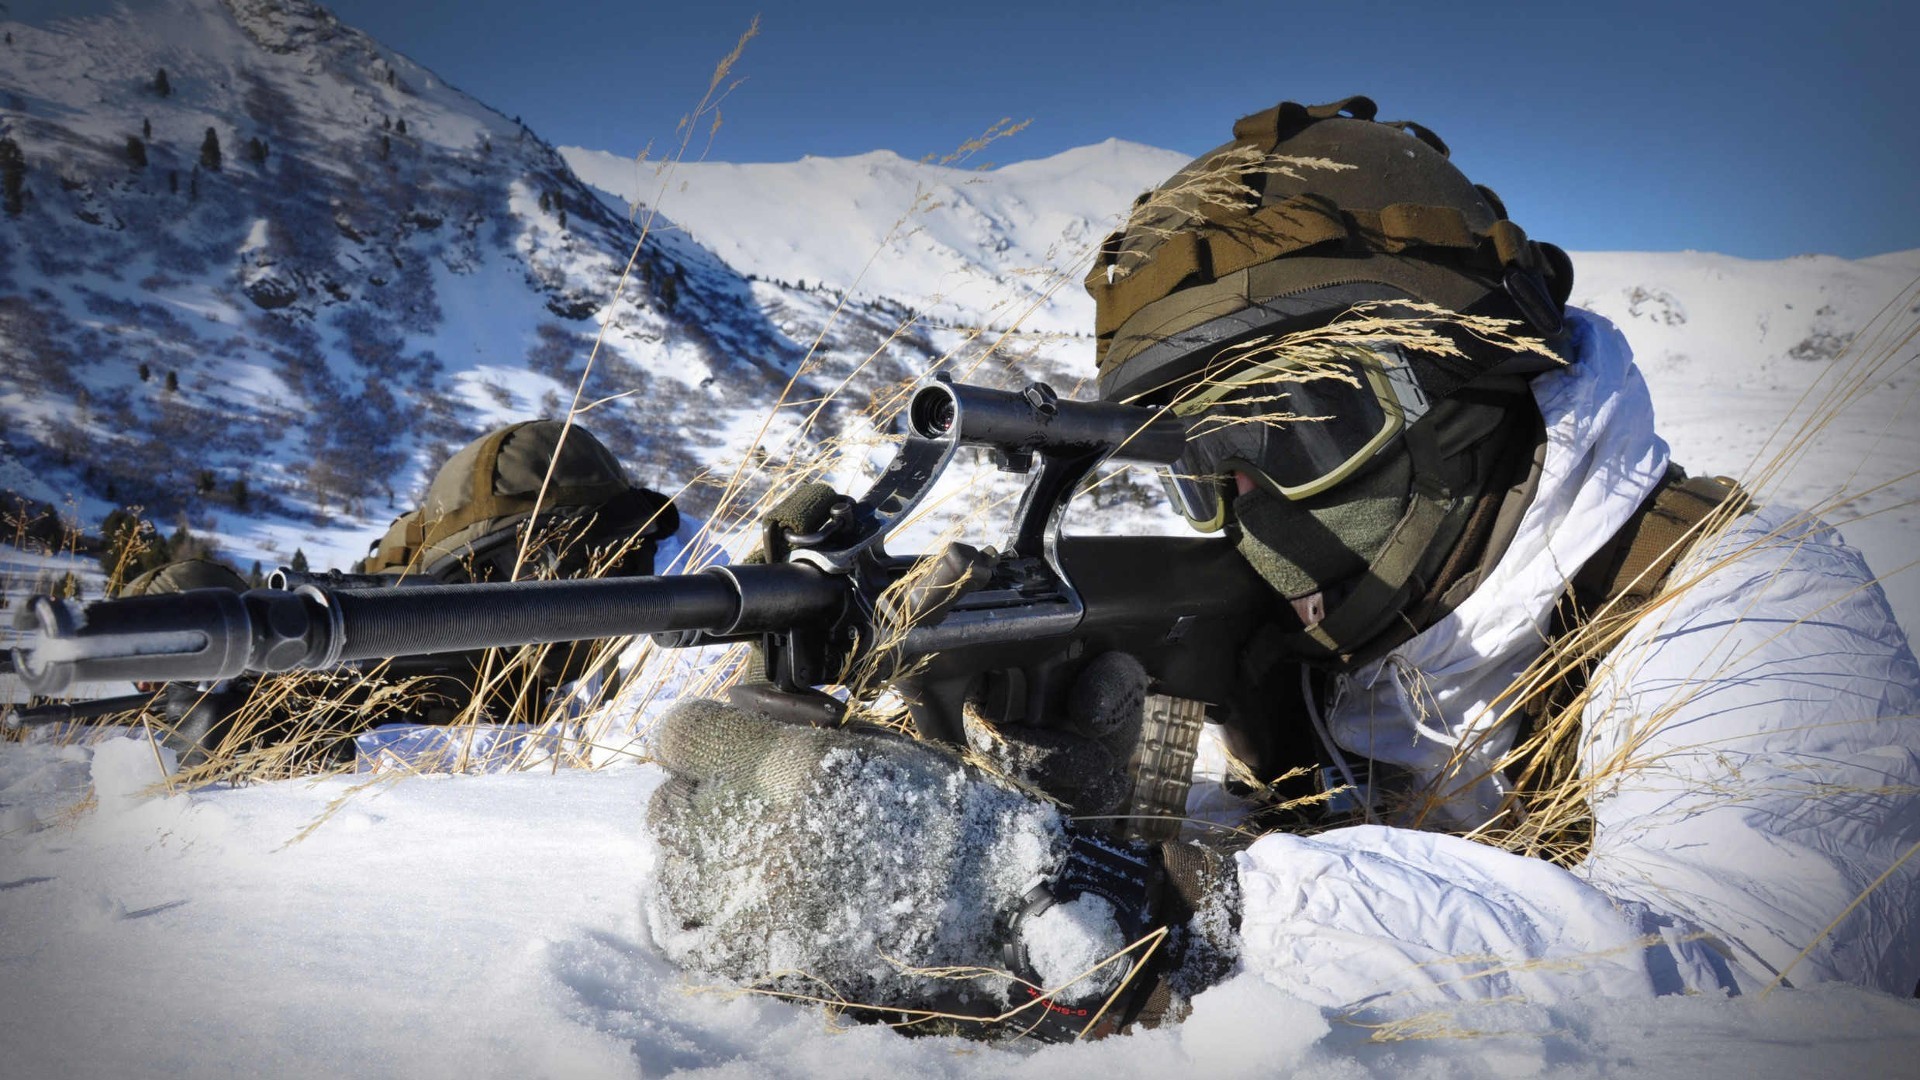 1920x1080 Similar Wallpapers. military, Soldier, Austrian Armed Forces, Snow, Mountain